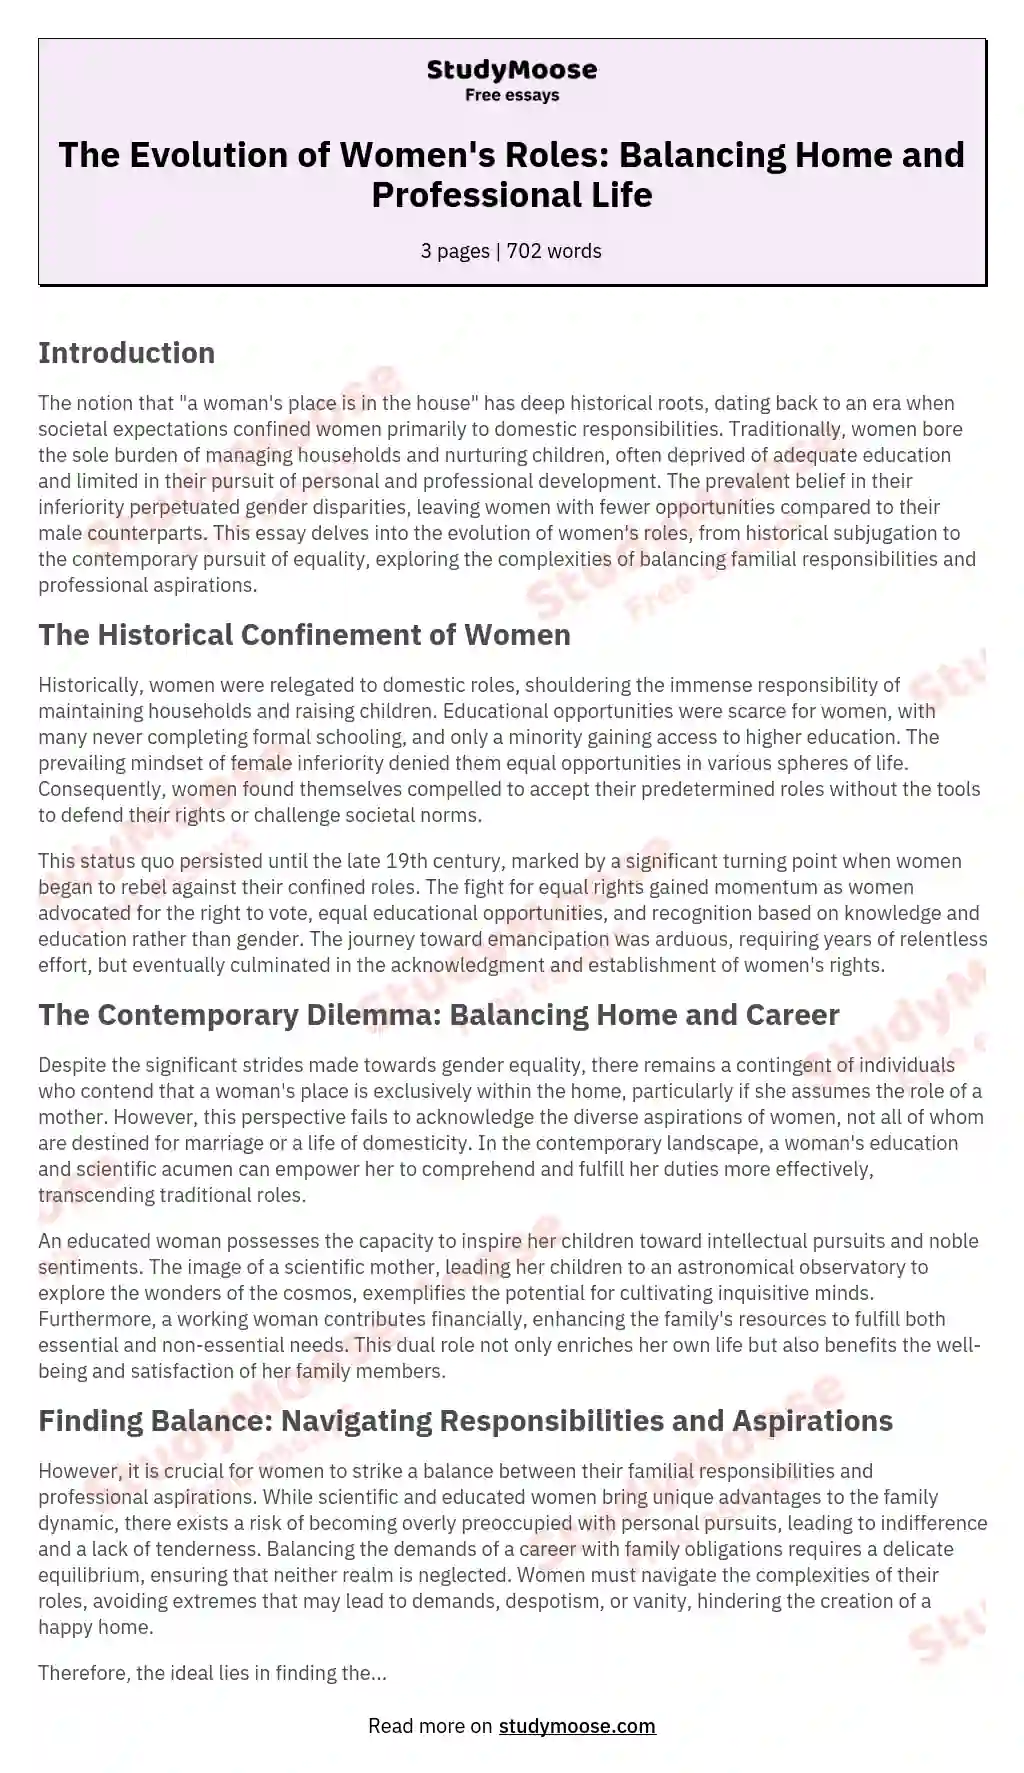 The Evolution of Women's Roles: Balancing Home and Professional Life essay